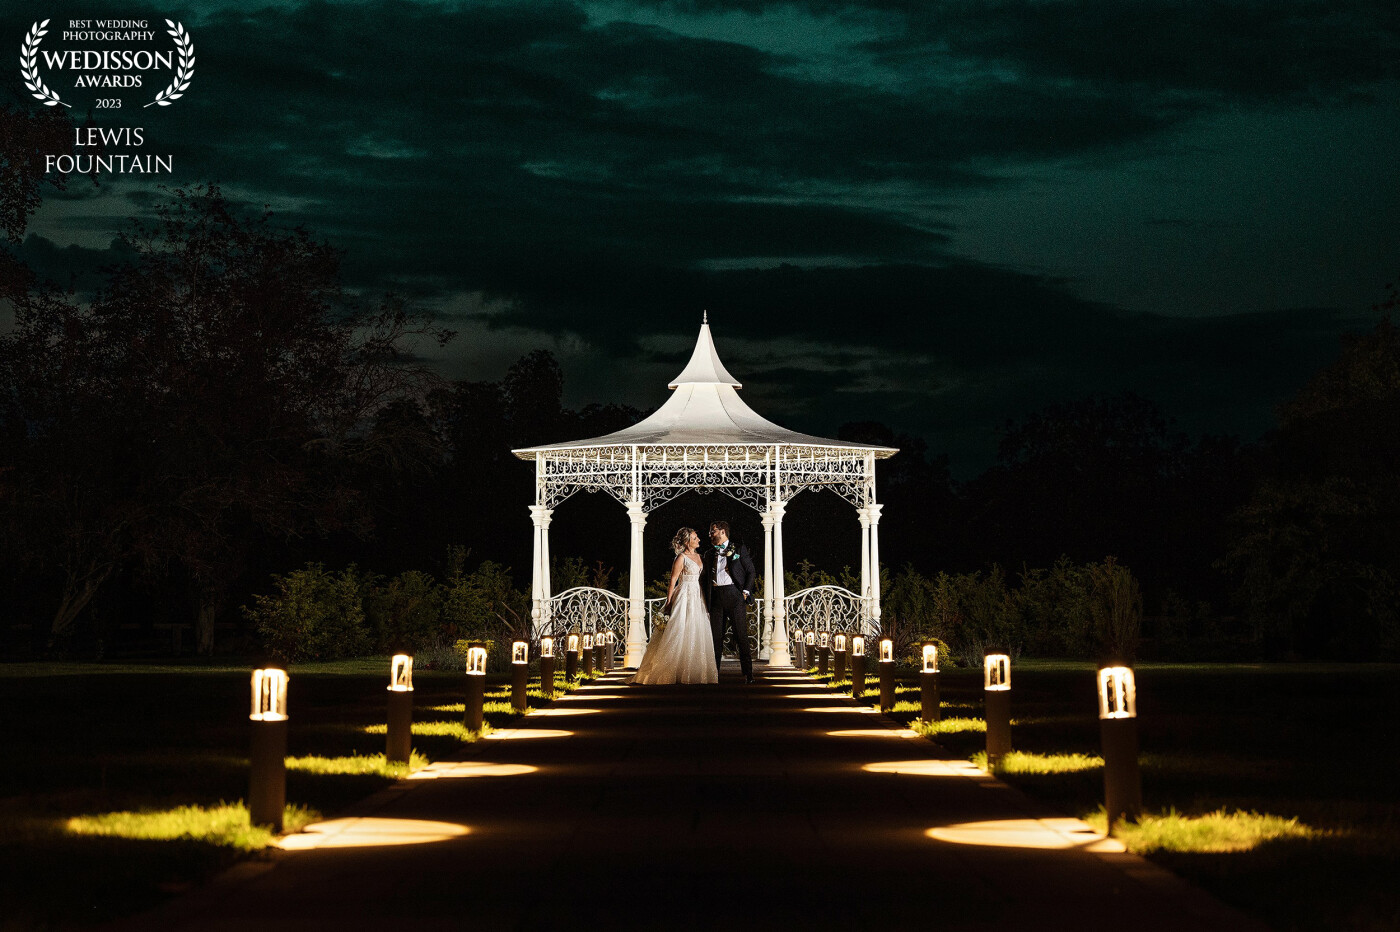 The new ceremony pavilion at Swynford Manor has been a favourite evening shot for photographers, but to get the best shot possible we knew we had to use all six of our mobile lights.<br />
It was a tricky shot to set up, but so worth it